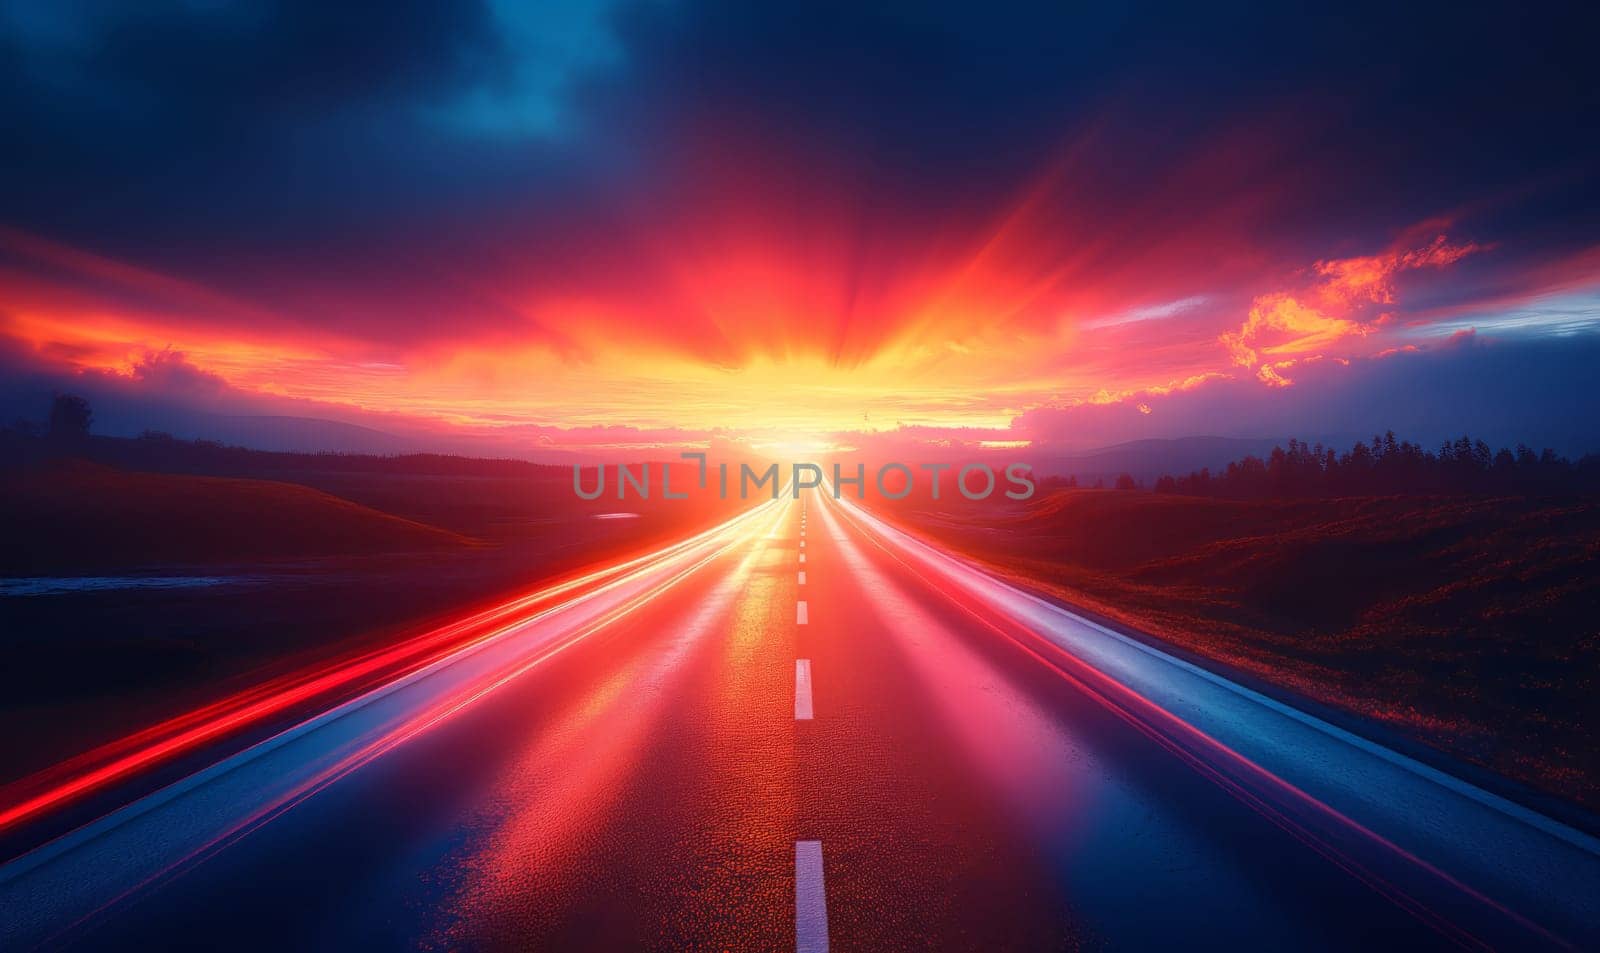 A highway stretching into the distance with the sun setting in the horizon.